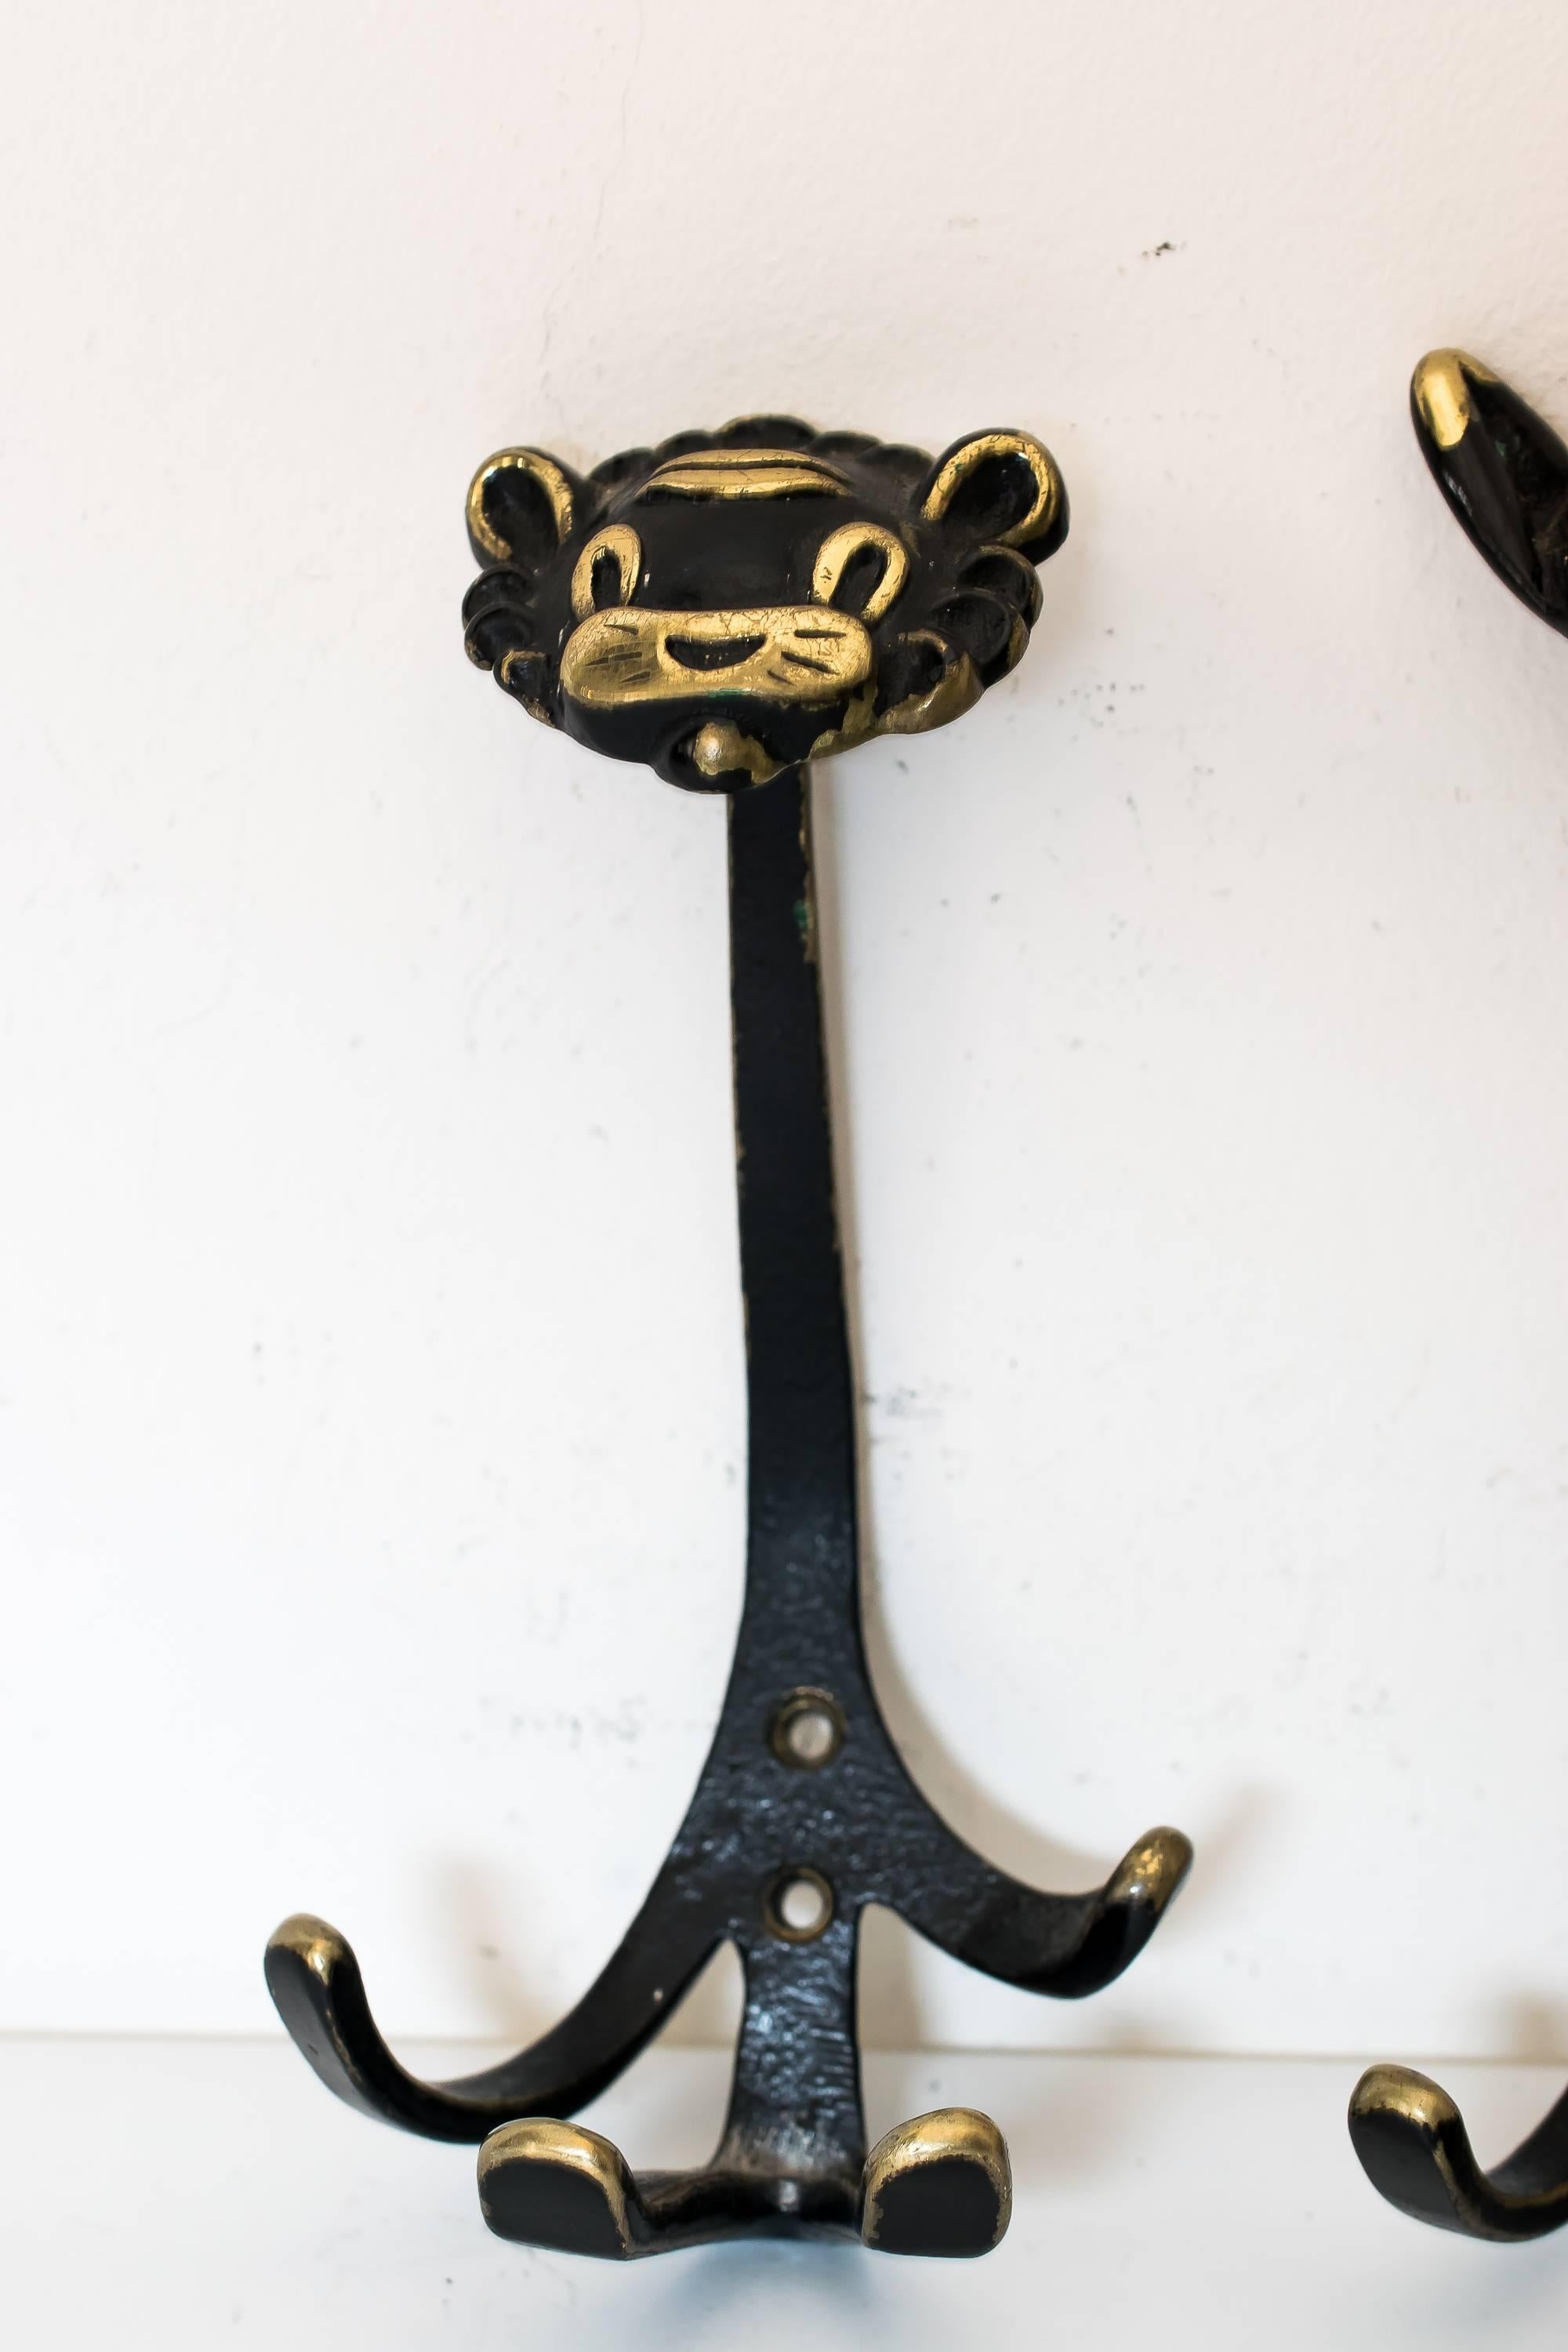 Two Walter Bosse wall hooks shows a cat and a lion, circa 1950s
Original condition
Measures: Lion: H 17cm, W 9cm, D 8cm
Cat: H 18cm, W 9cm, D 7cm.
2 are available, priced and sold per piece.

